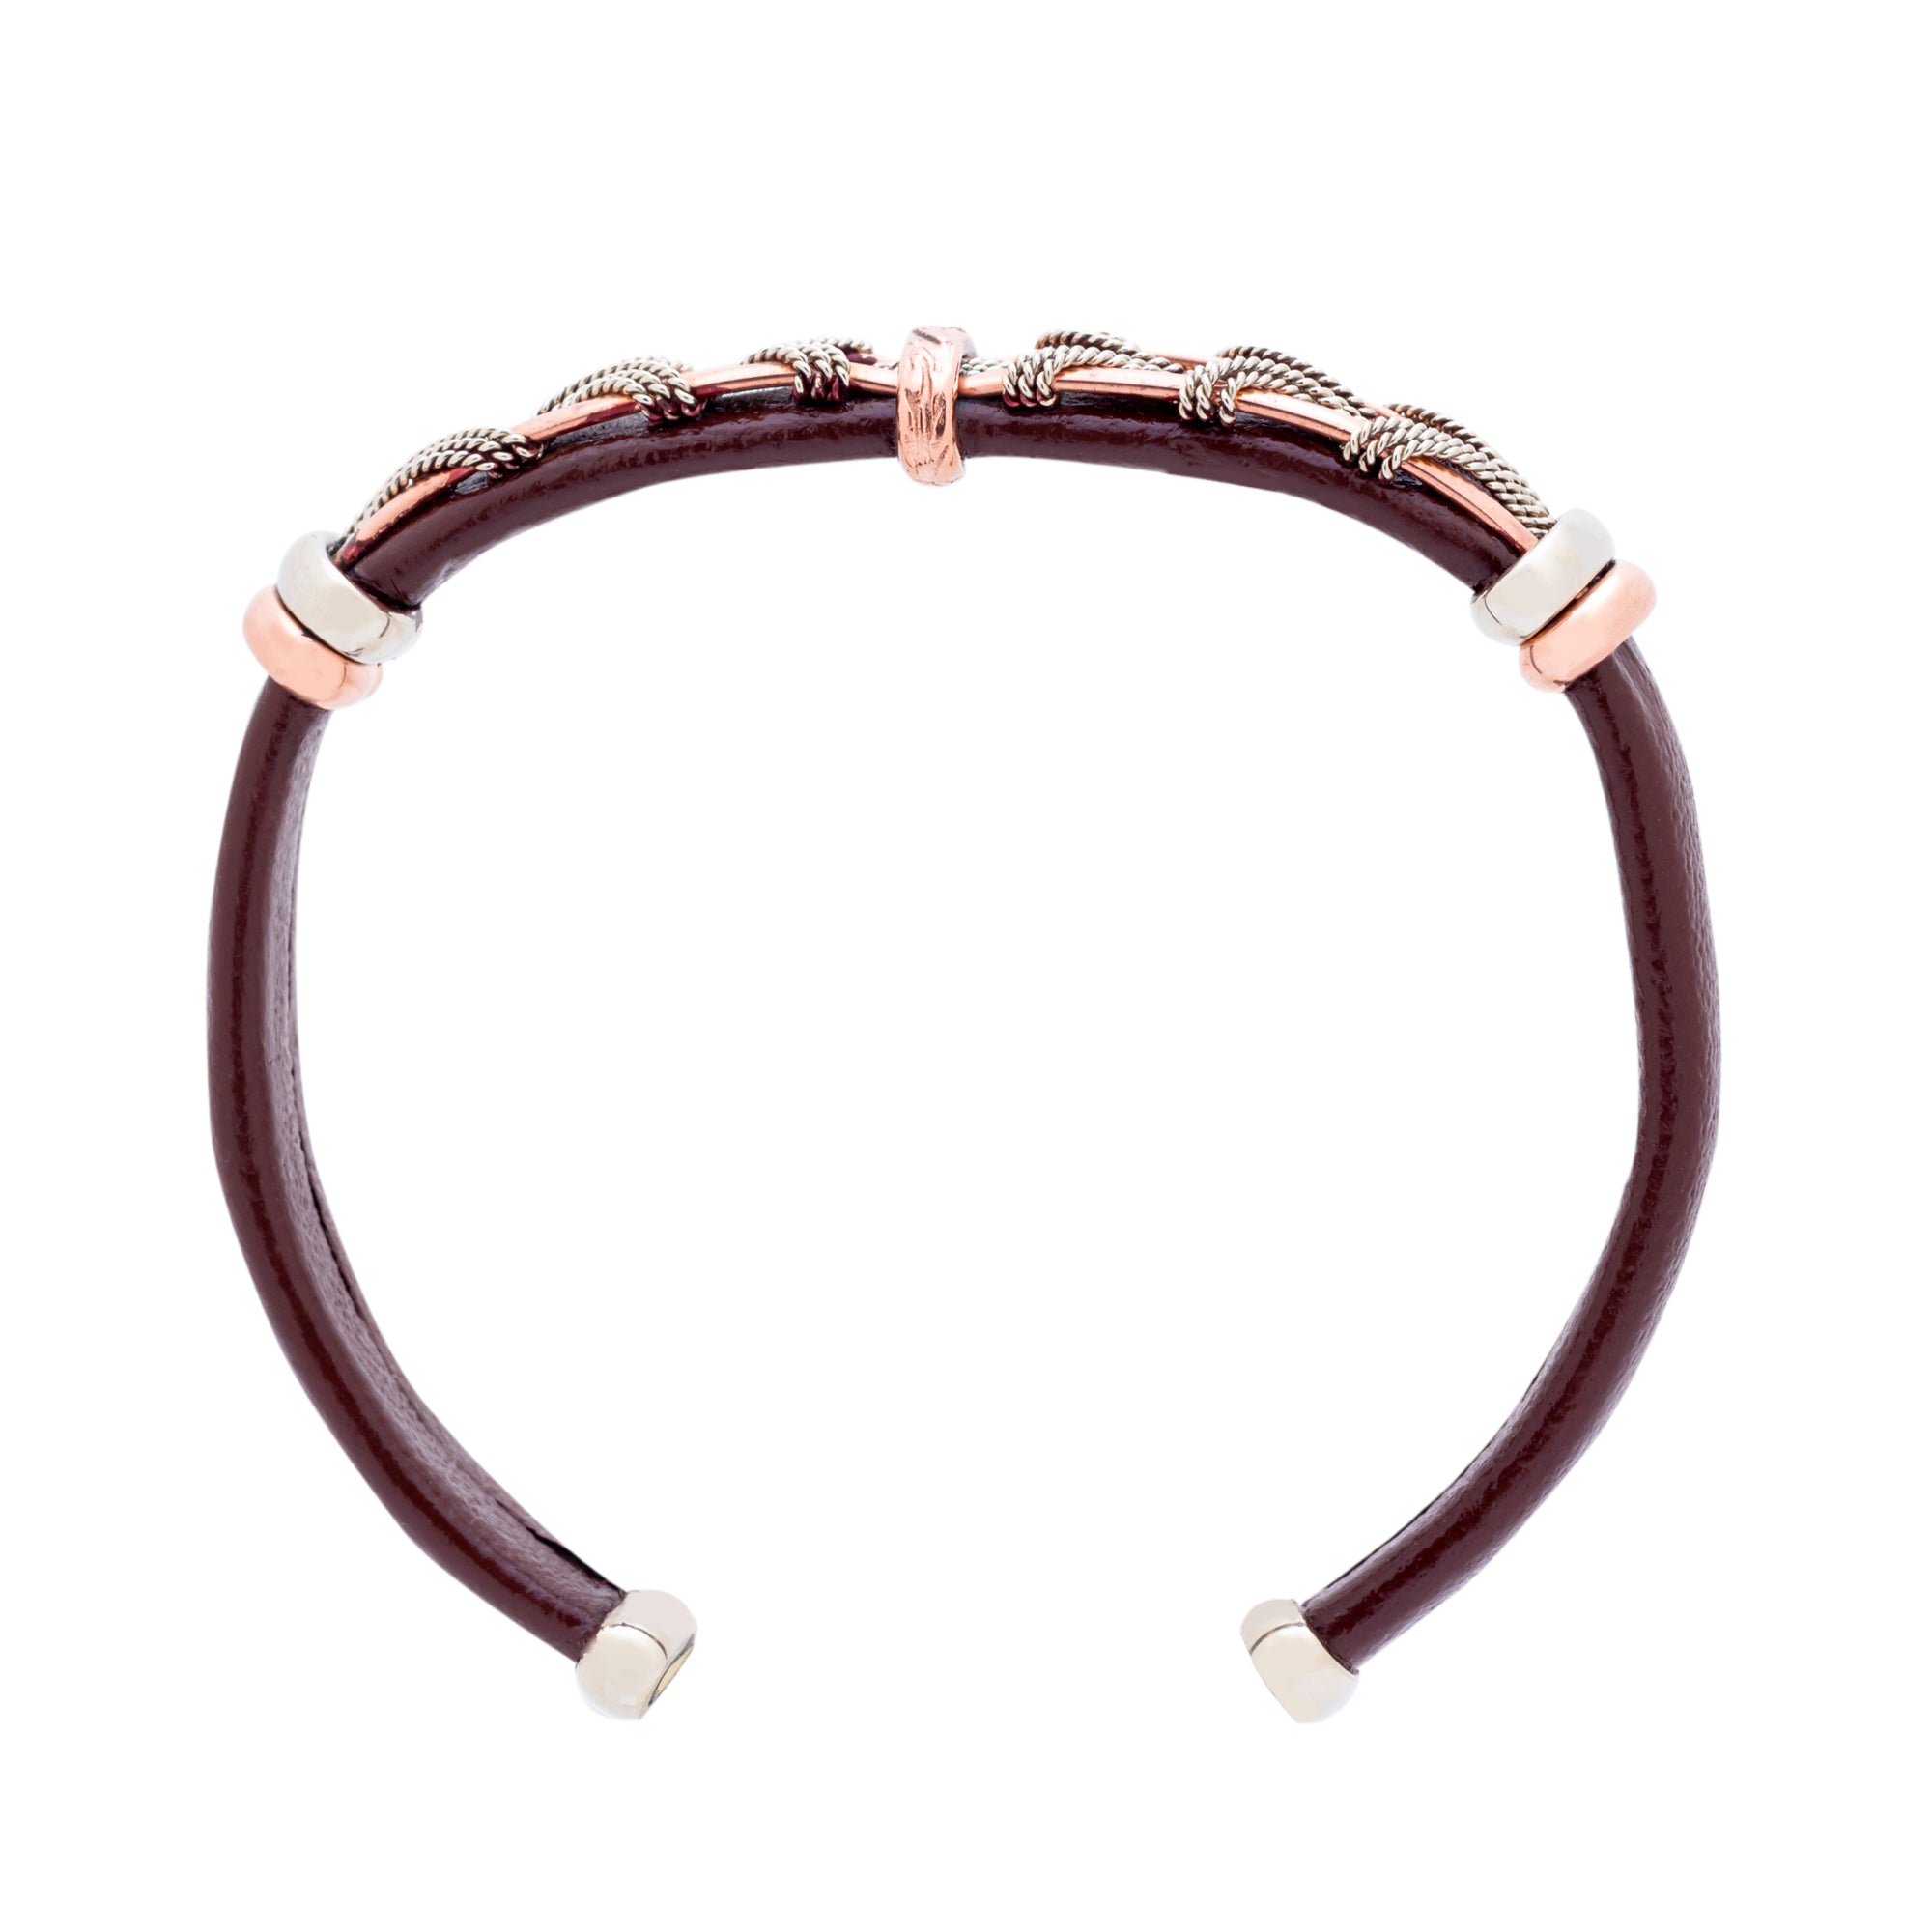 Leather Bracelet BR.ULB.0303 - Brown Leather Cuff Bracelet -Handcrafted by HPSilver, LLC.